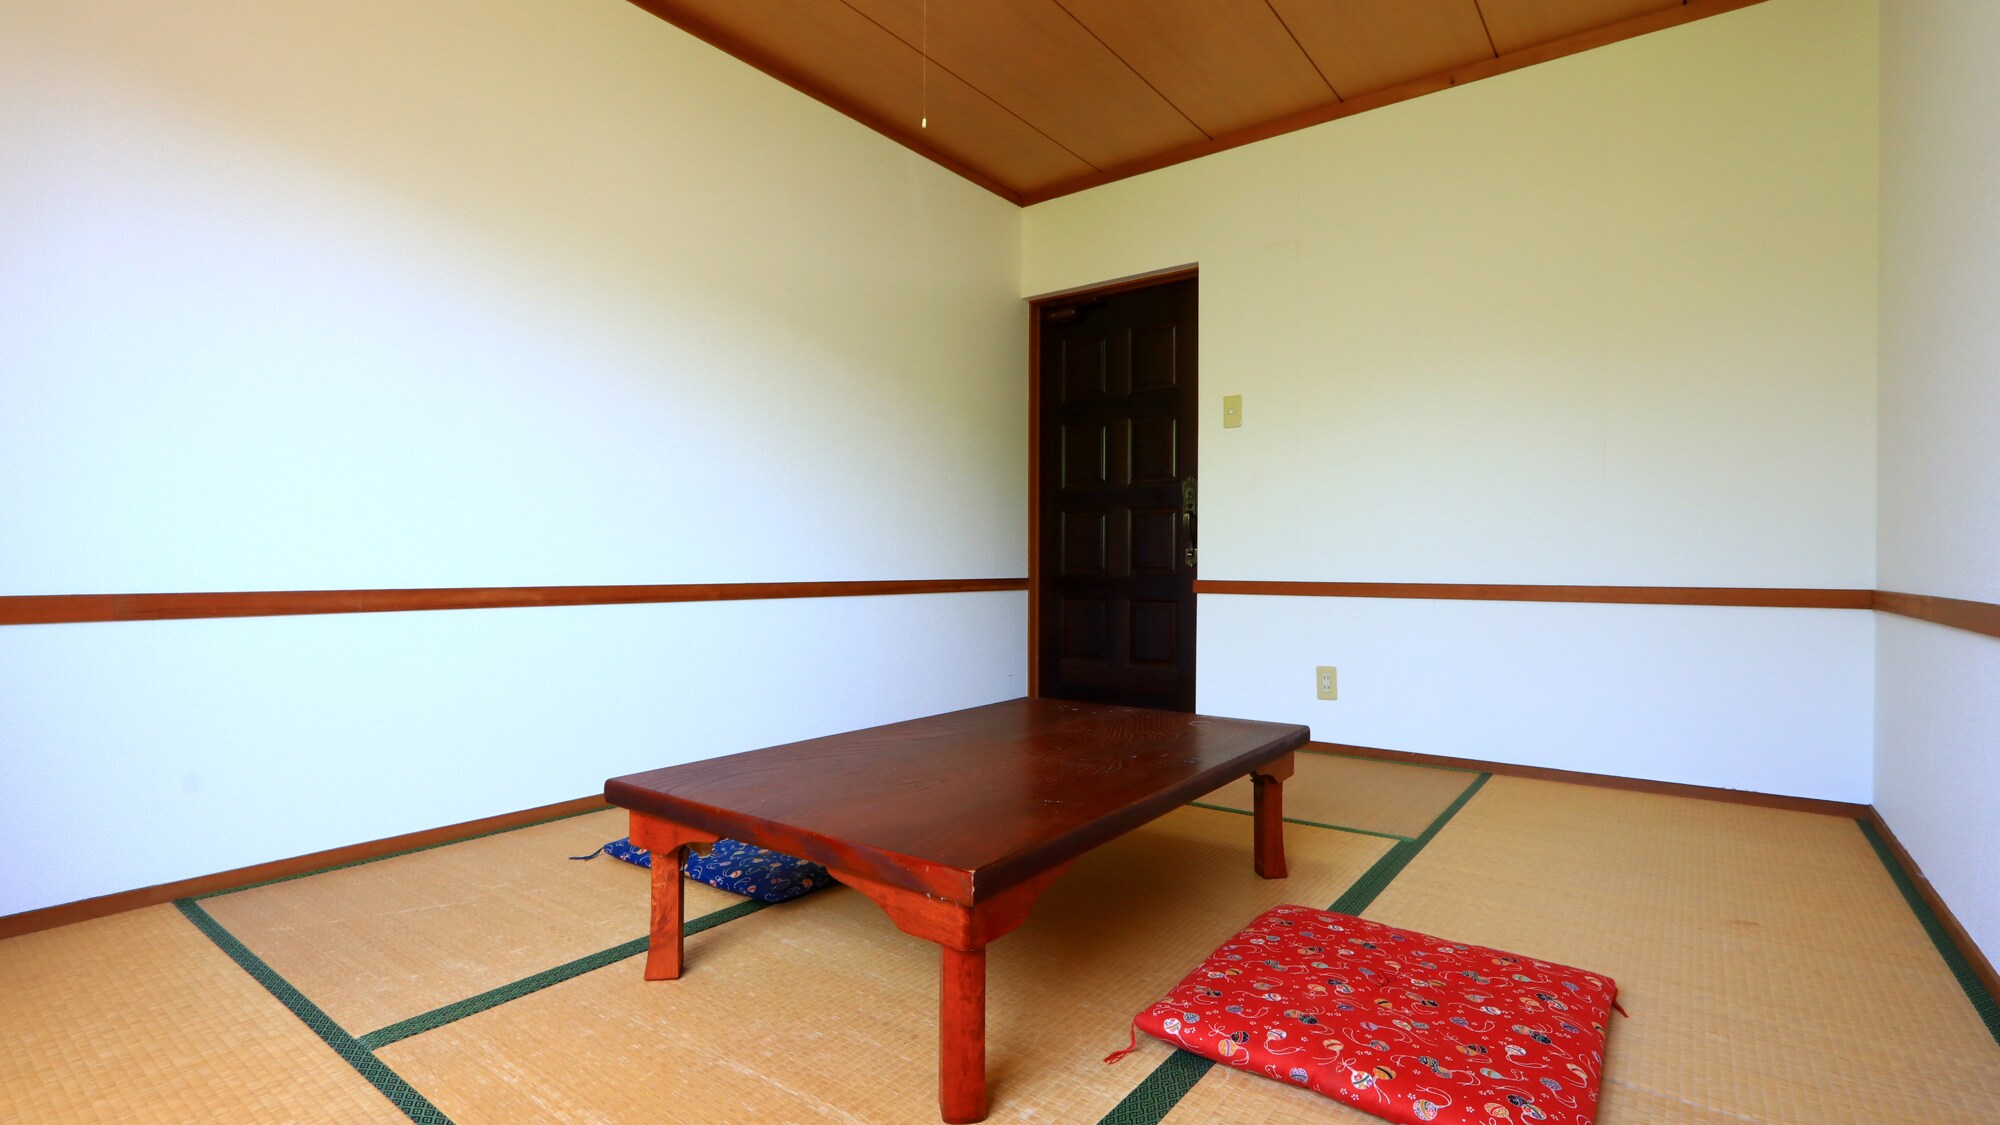 [Main building/6 tatami mats] A room with a calm atmosphere.